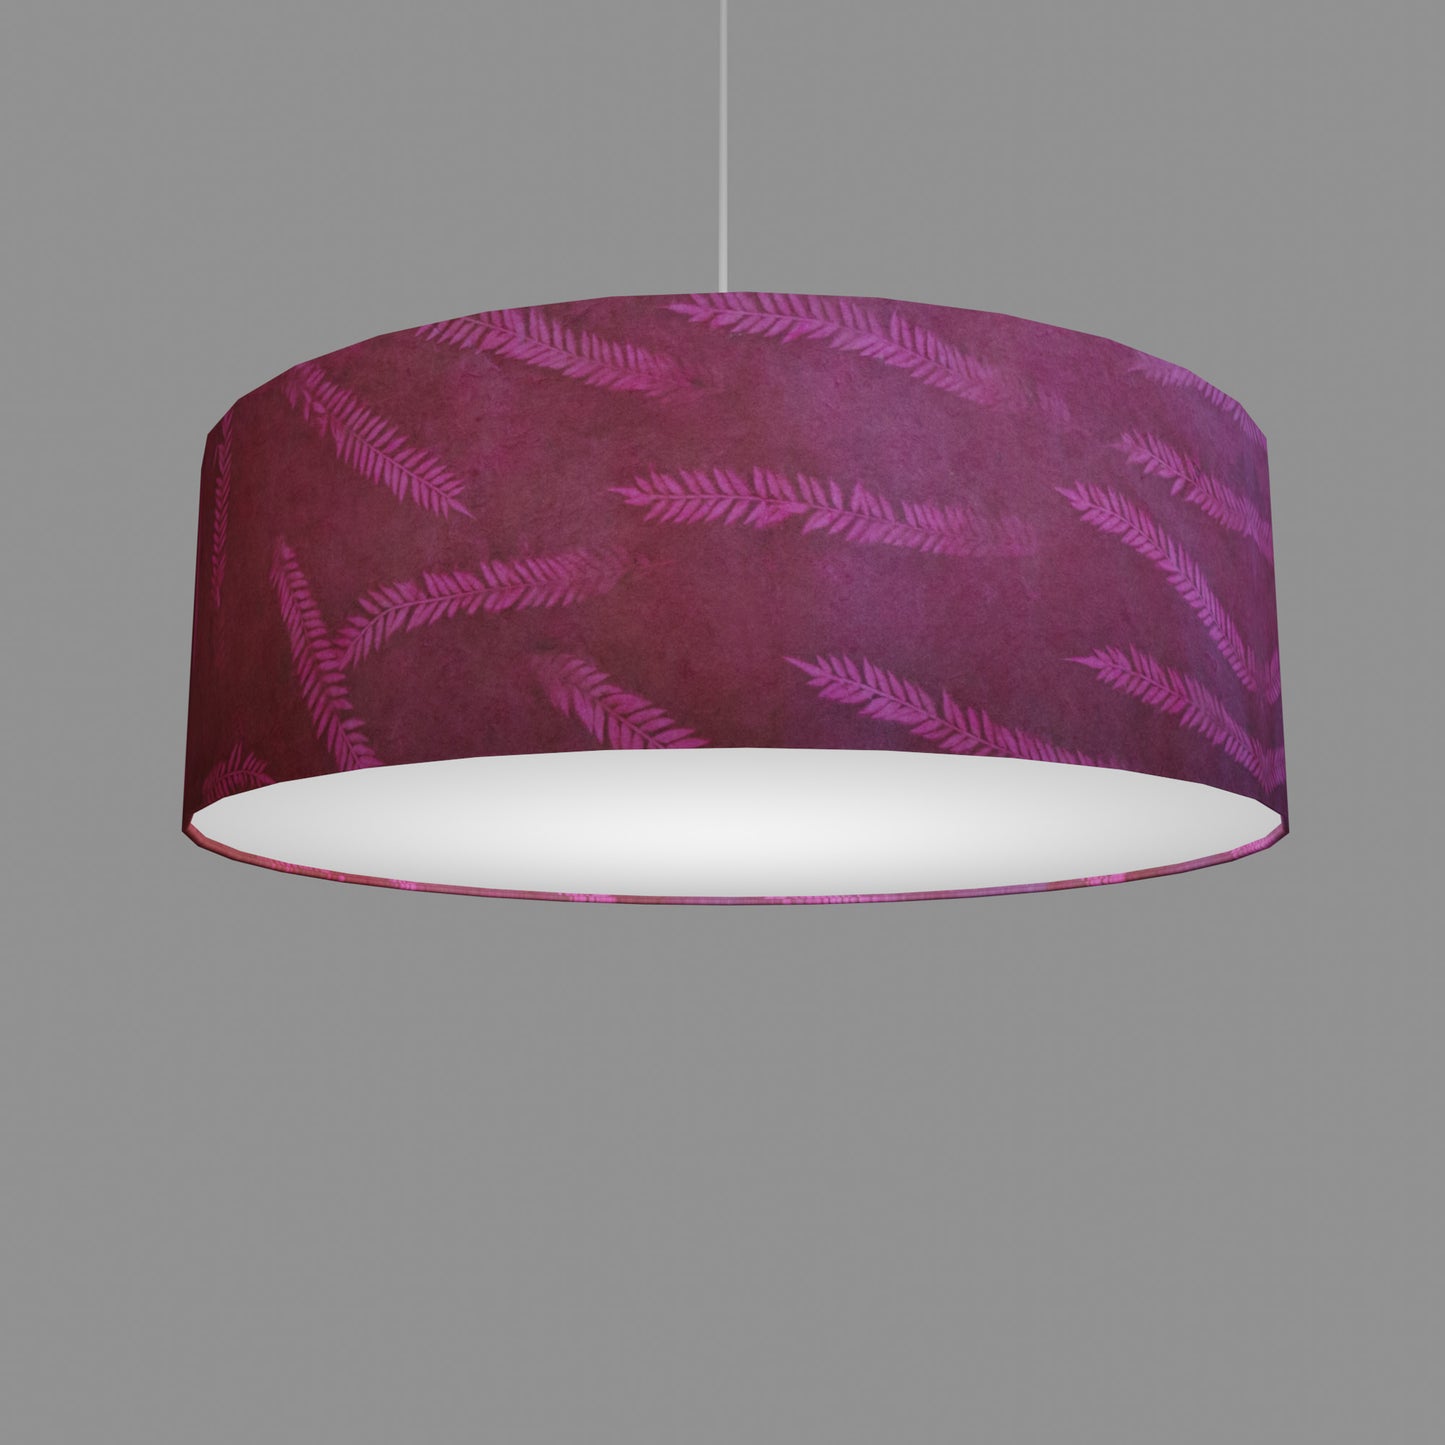 Drum Lamp Shade - P25 - Resistance Dyed Pink Fern, 60cm(d) x 20cm(h)